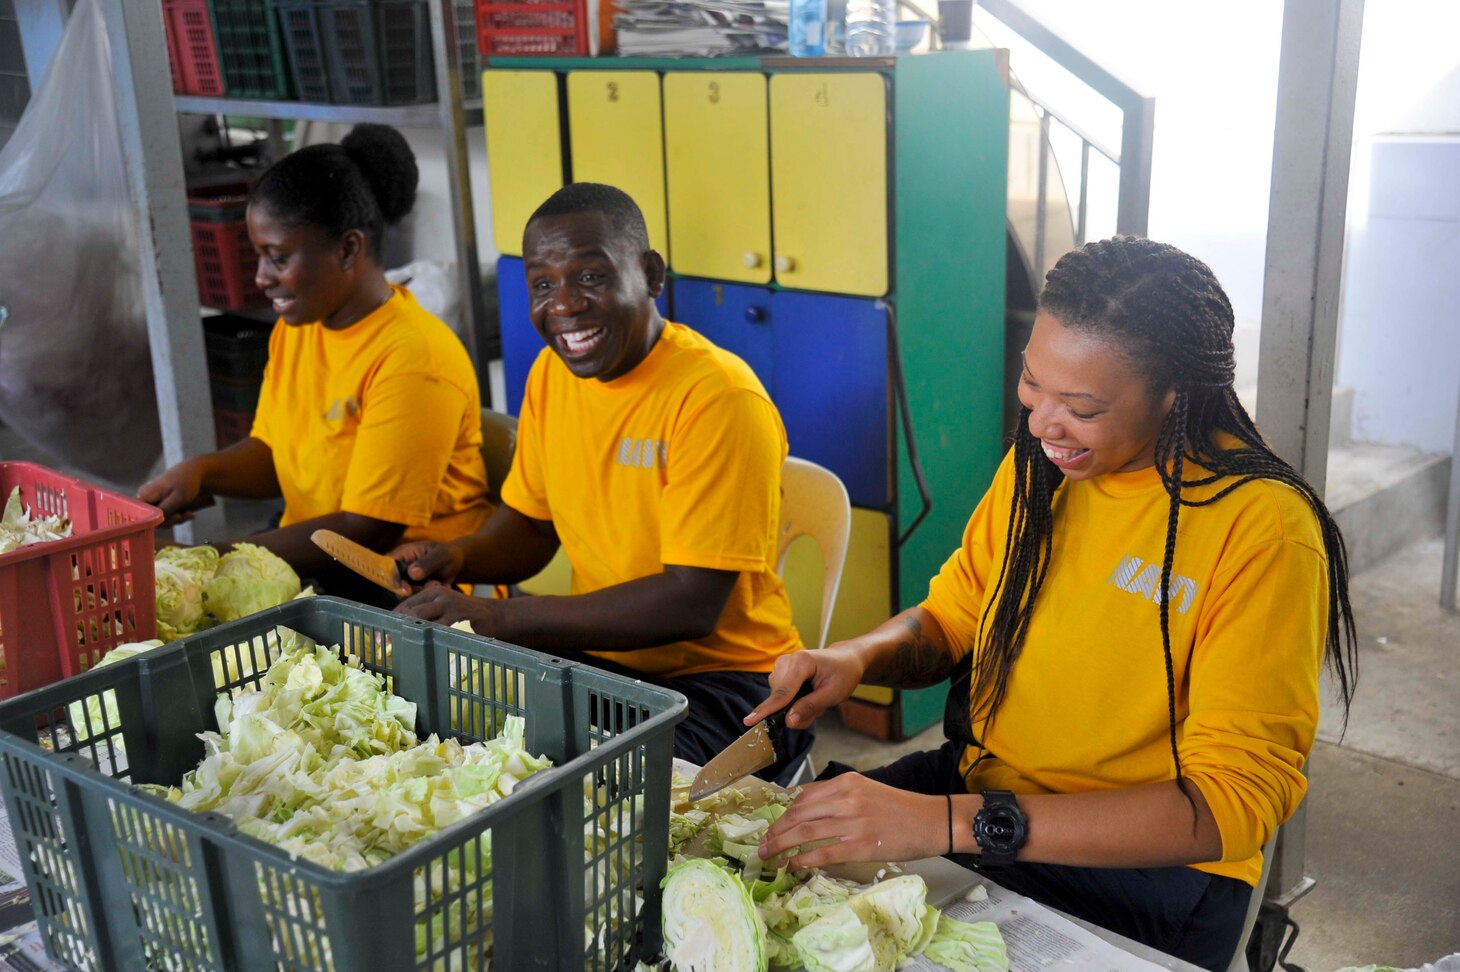 SINGAPORE (Dec. 20, 2018) – Sailors assigned to the submarine tender USS Emory S. Land (AS 39) cut cabbage during a community service event at the Willing Hearts Soup Kitchen in Singapore, Dec. 20. Emory S. Land is a forward-deployed expeditionary submarine tender on an extended deployment conducting coordinated tended moorings and afloat maintenance in the U.S. 5th and 7th Fleet areas of operations.